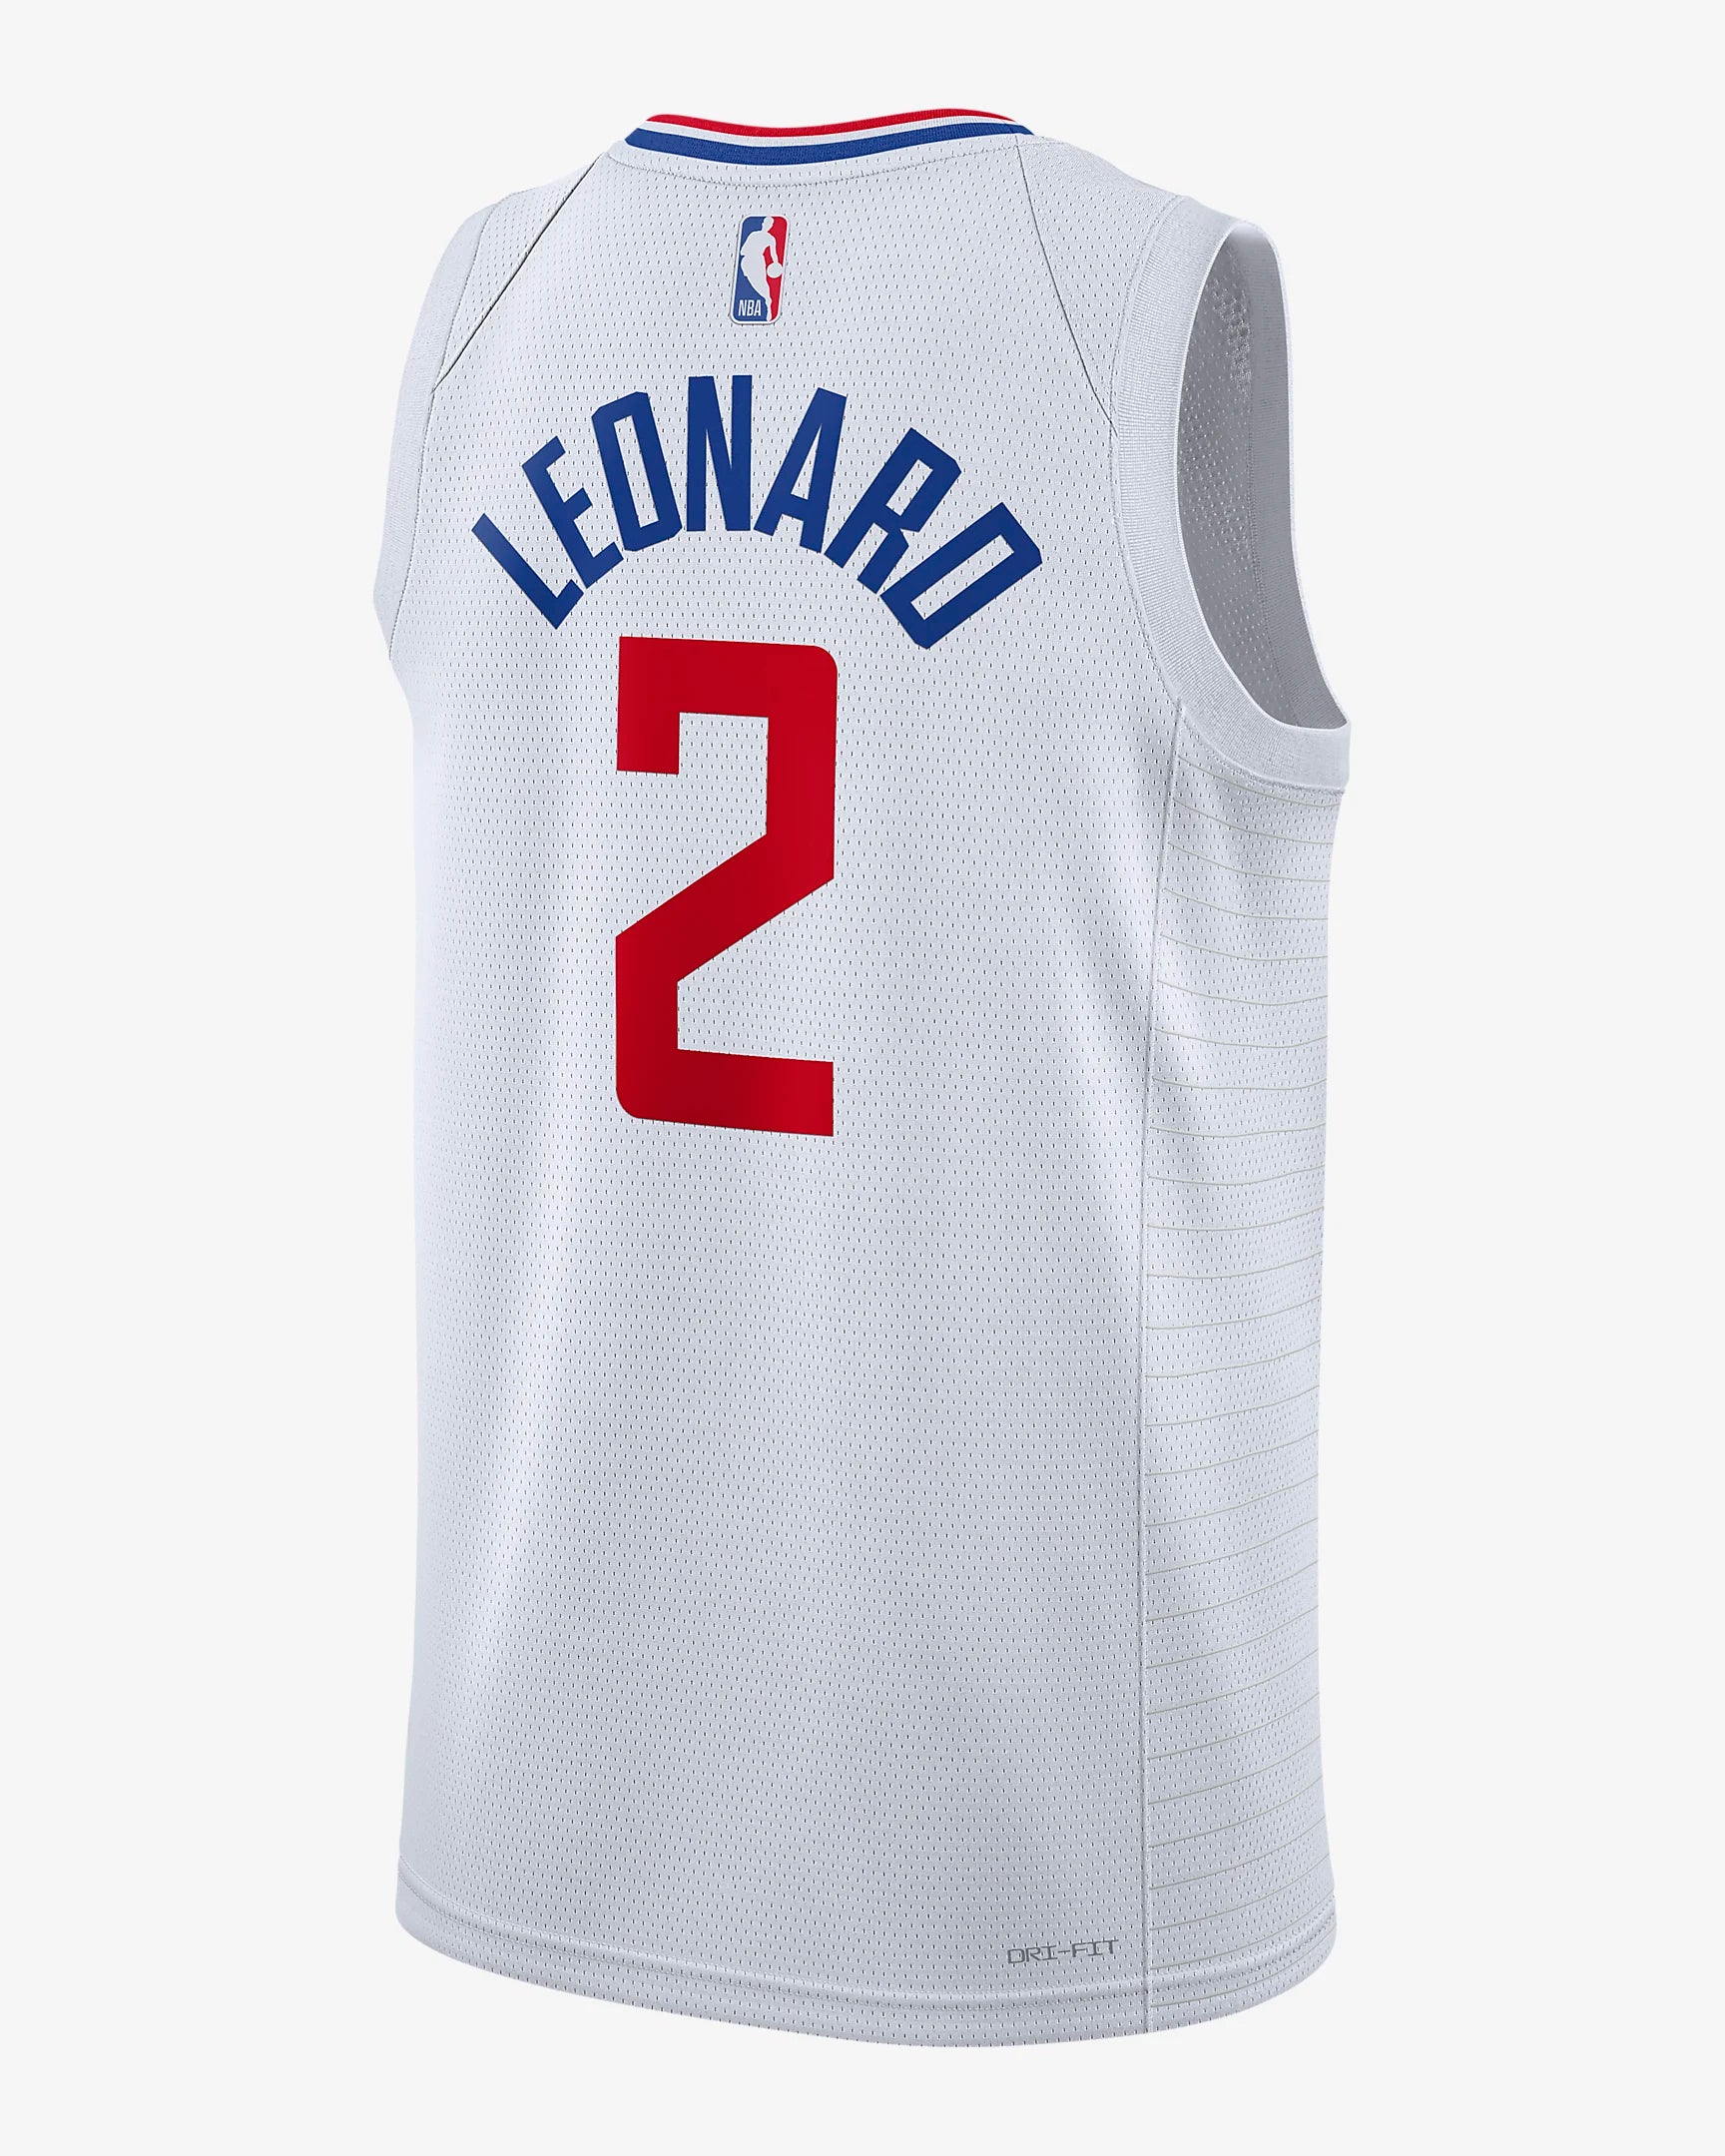 Clippers Celebrate 35th Season in L.A. With New Nike City Edition Jersey